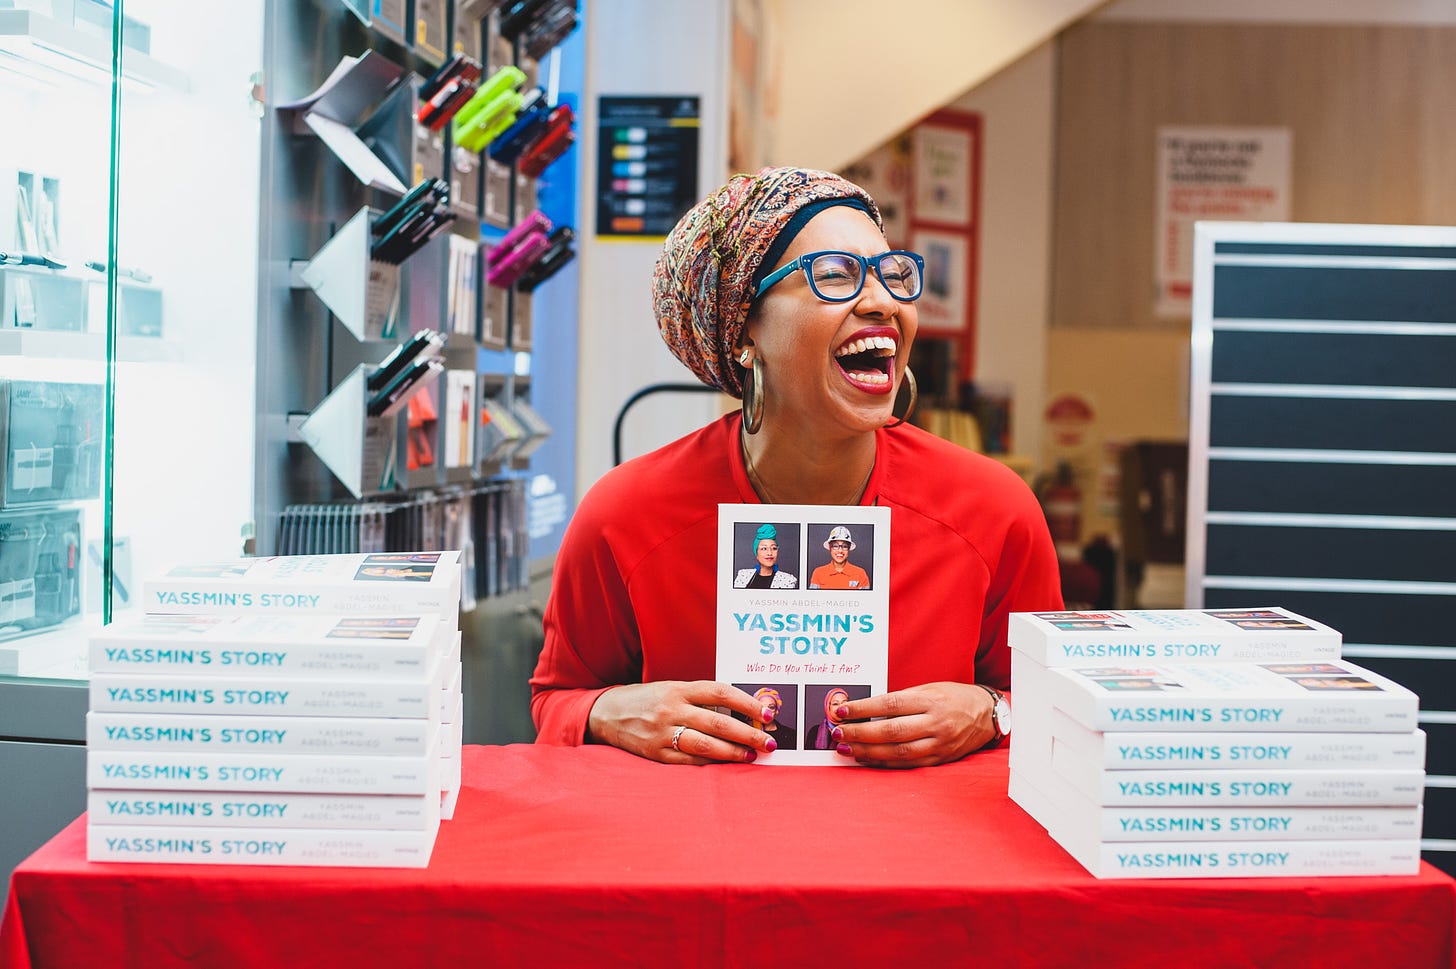 Yassmin Abdel-Magied holding a copy of her first book, Yassmin's story, sitting at a table between two piles of her books and looking off to the side, eyes closed mouth open in an extreme expression.